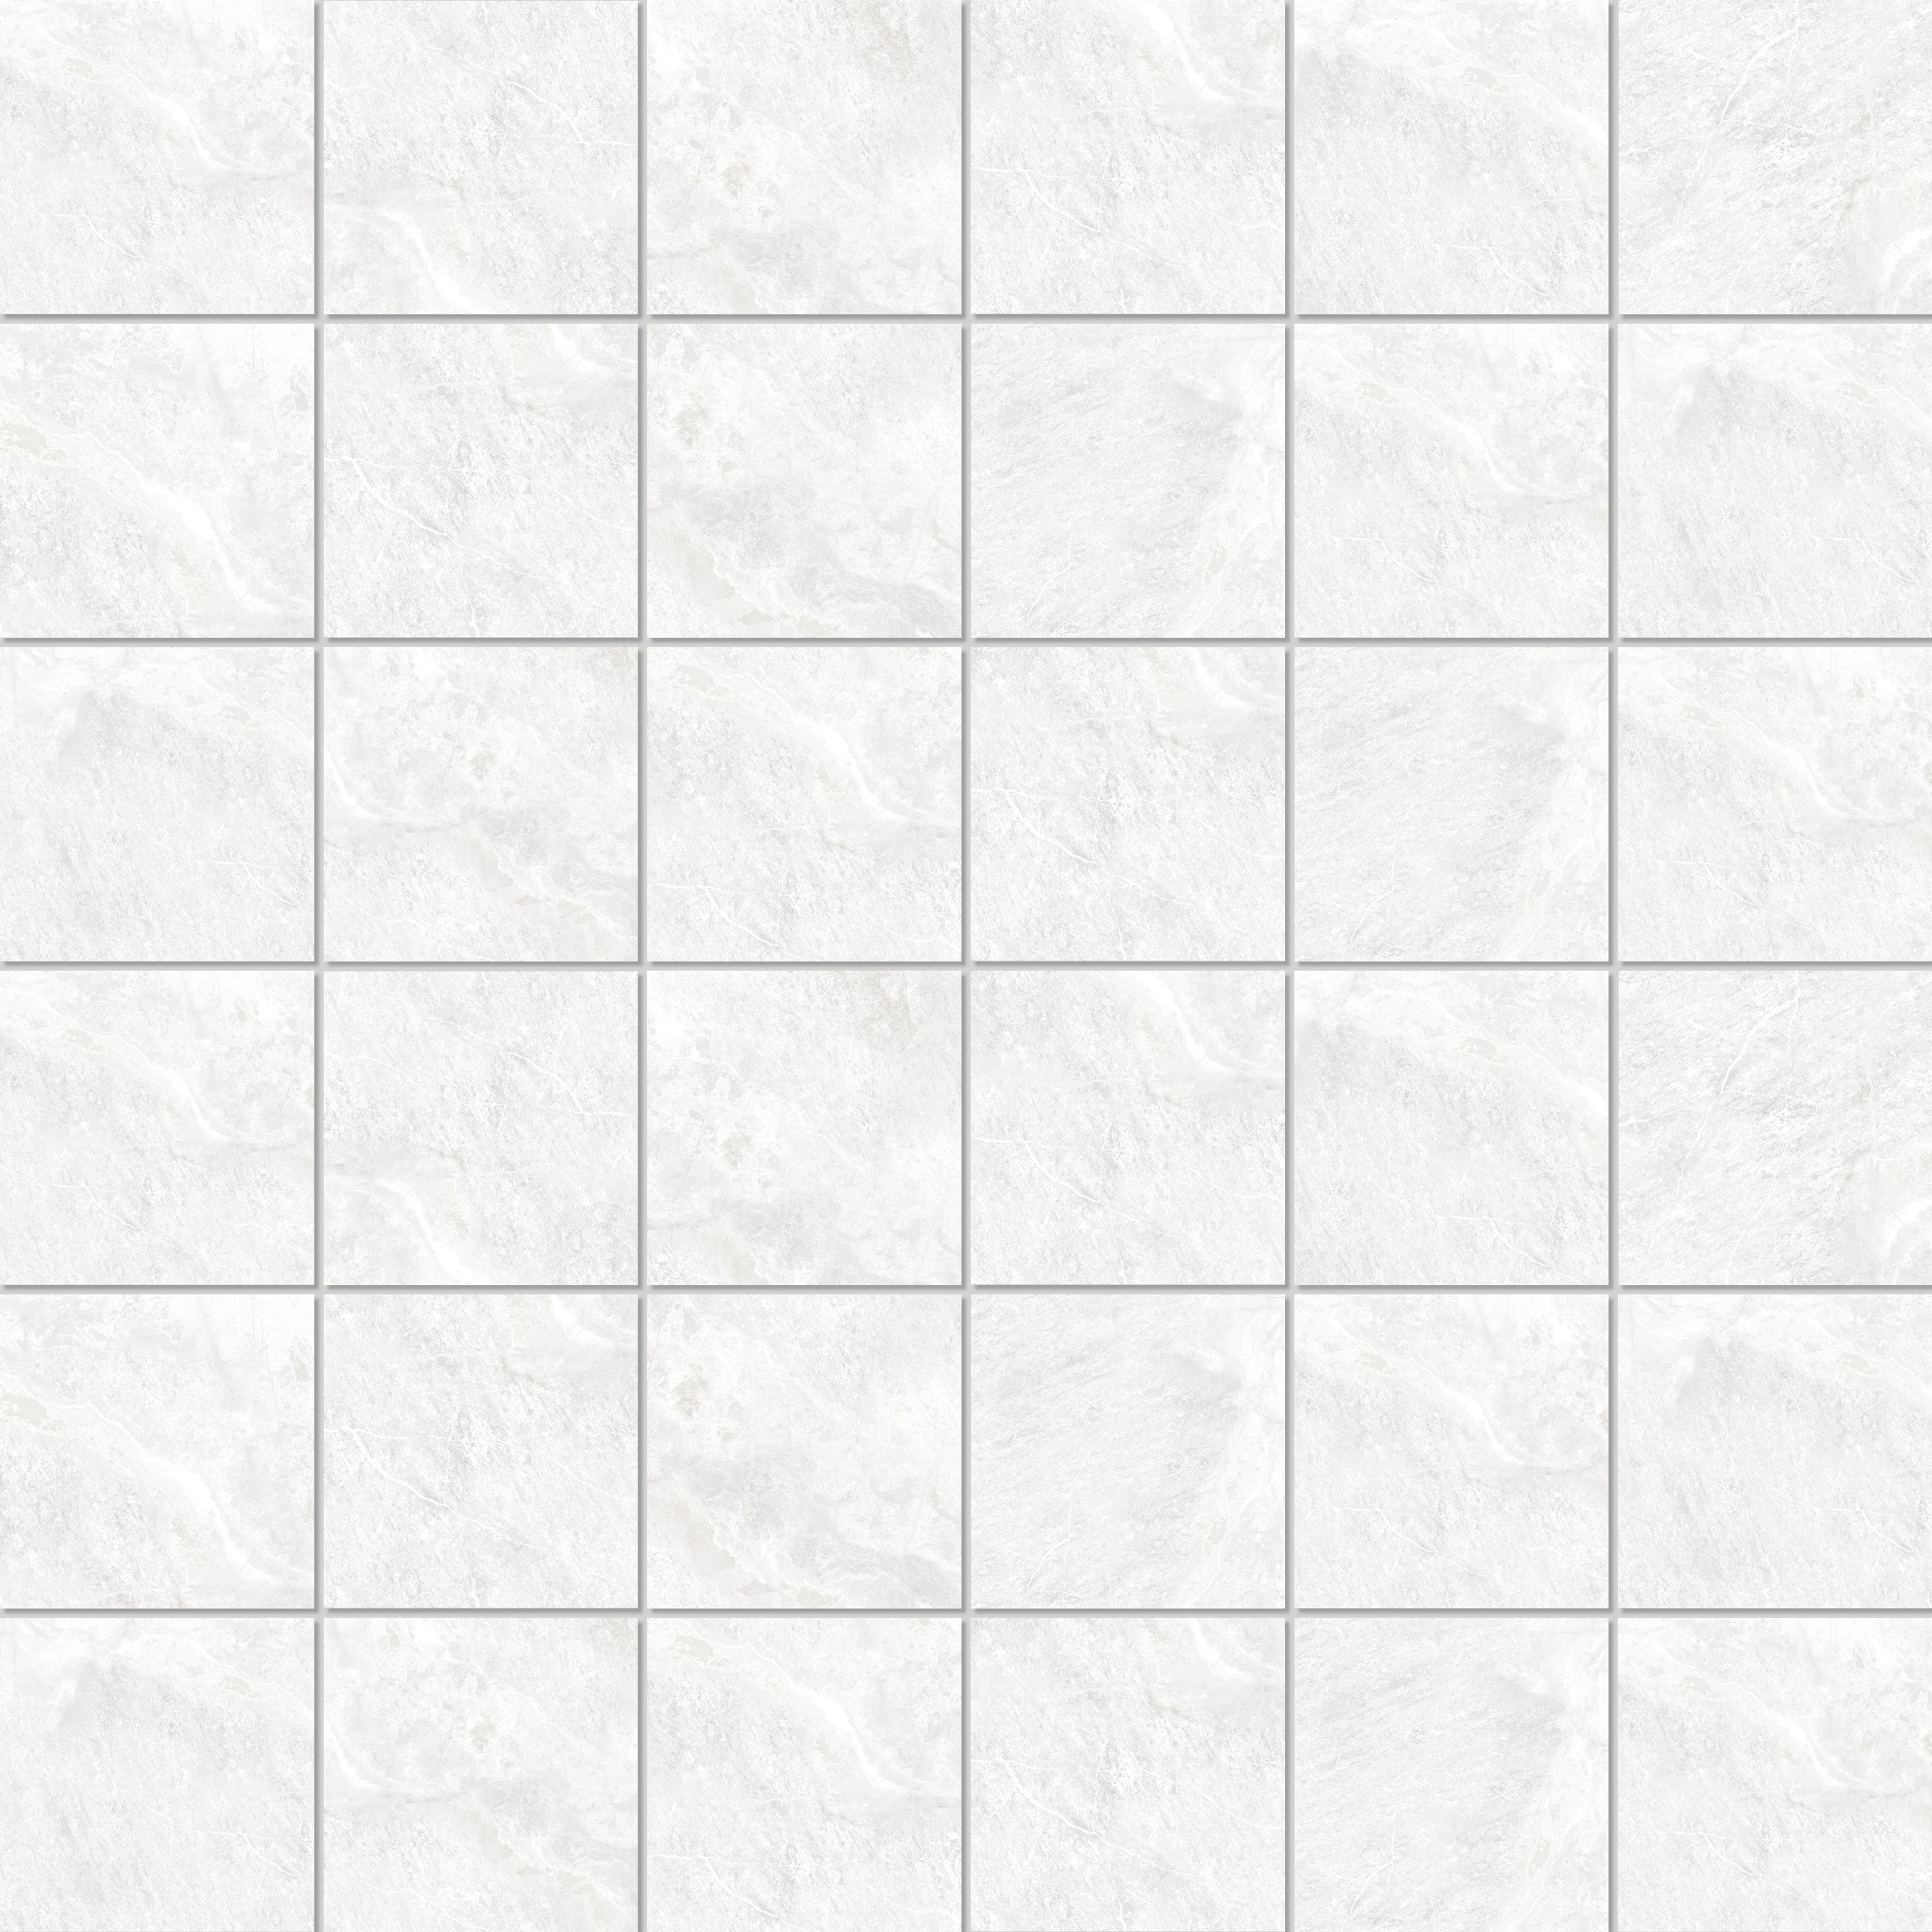 landmark contract barcelona white straight stack 2x2 mosaic 12x12x8mm matte pressed porcelain tile distributed by surface group international